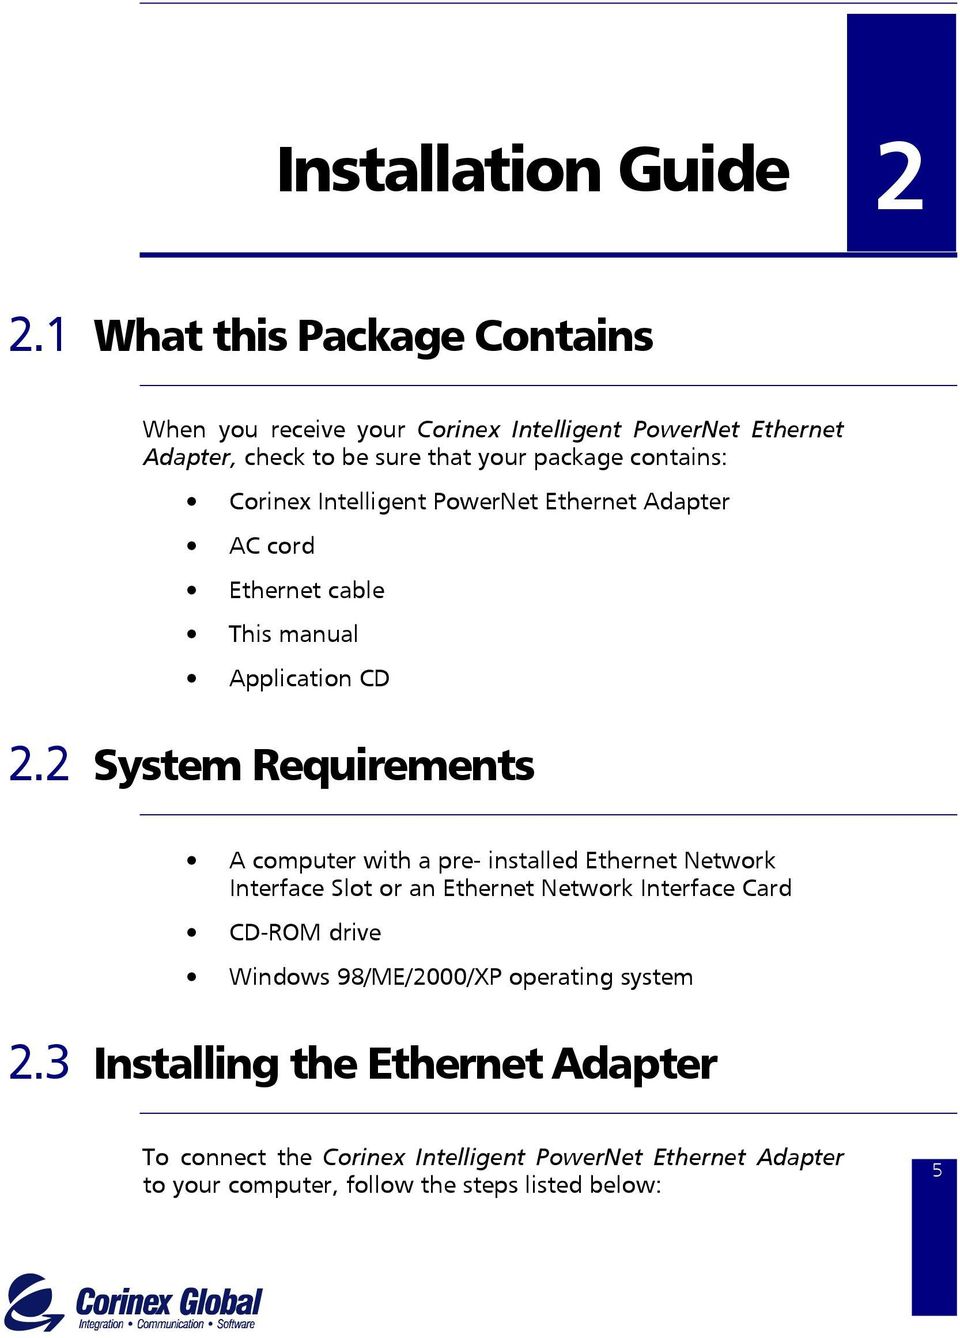 Corinex Intelligent PowerNet Ethernet Adapter AC cord Ethernet cable This manual Application CD 2.